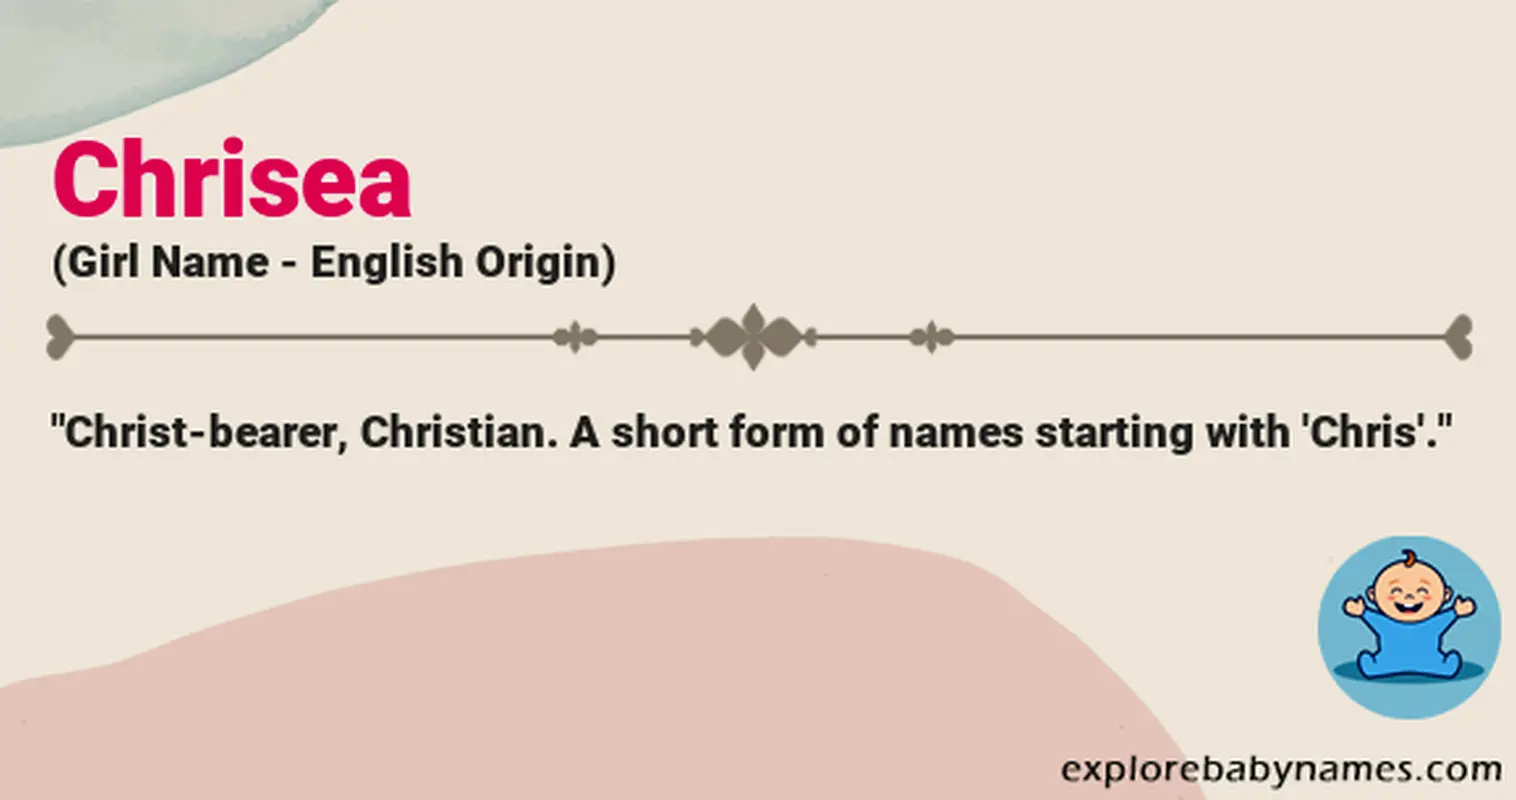 Meaning of Chrisea